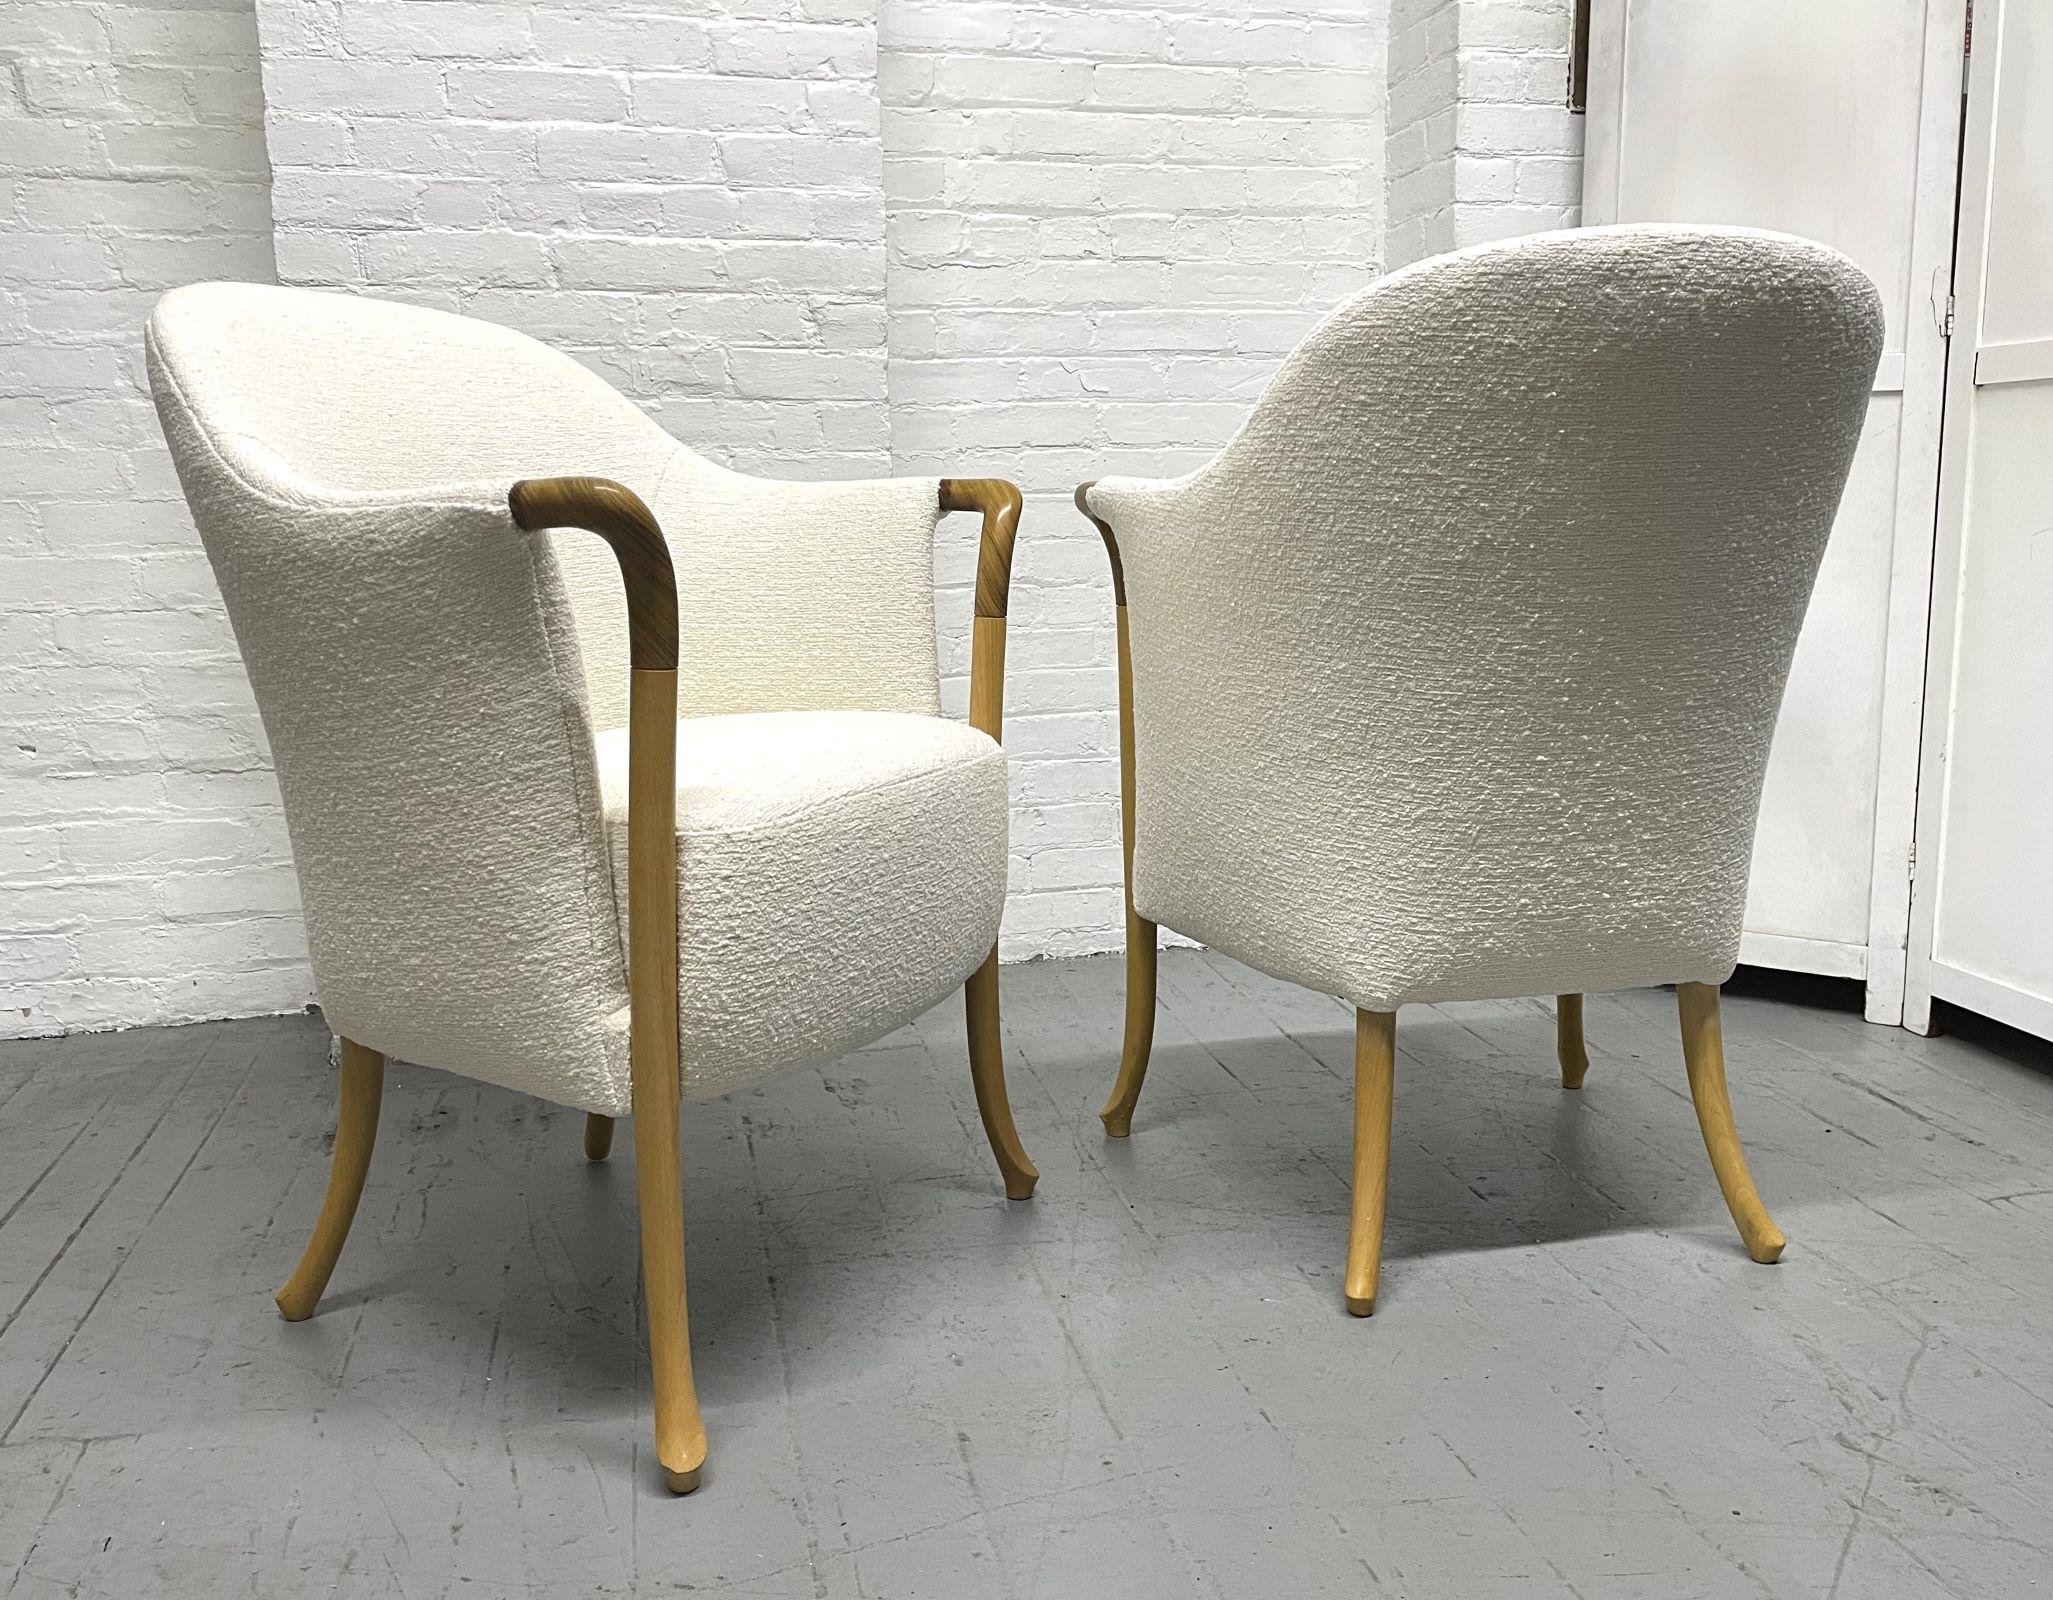 Pair of Umberto Asnago for Giorgetti Progetti arm or lounge chairs. Chairs are upholstered in off-white Bouclé with an oak and beech frame.